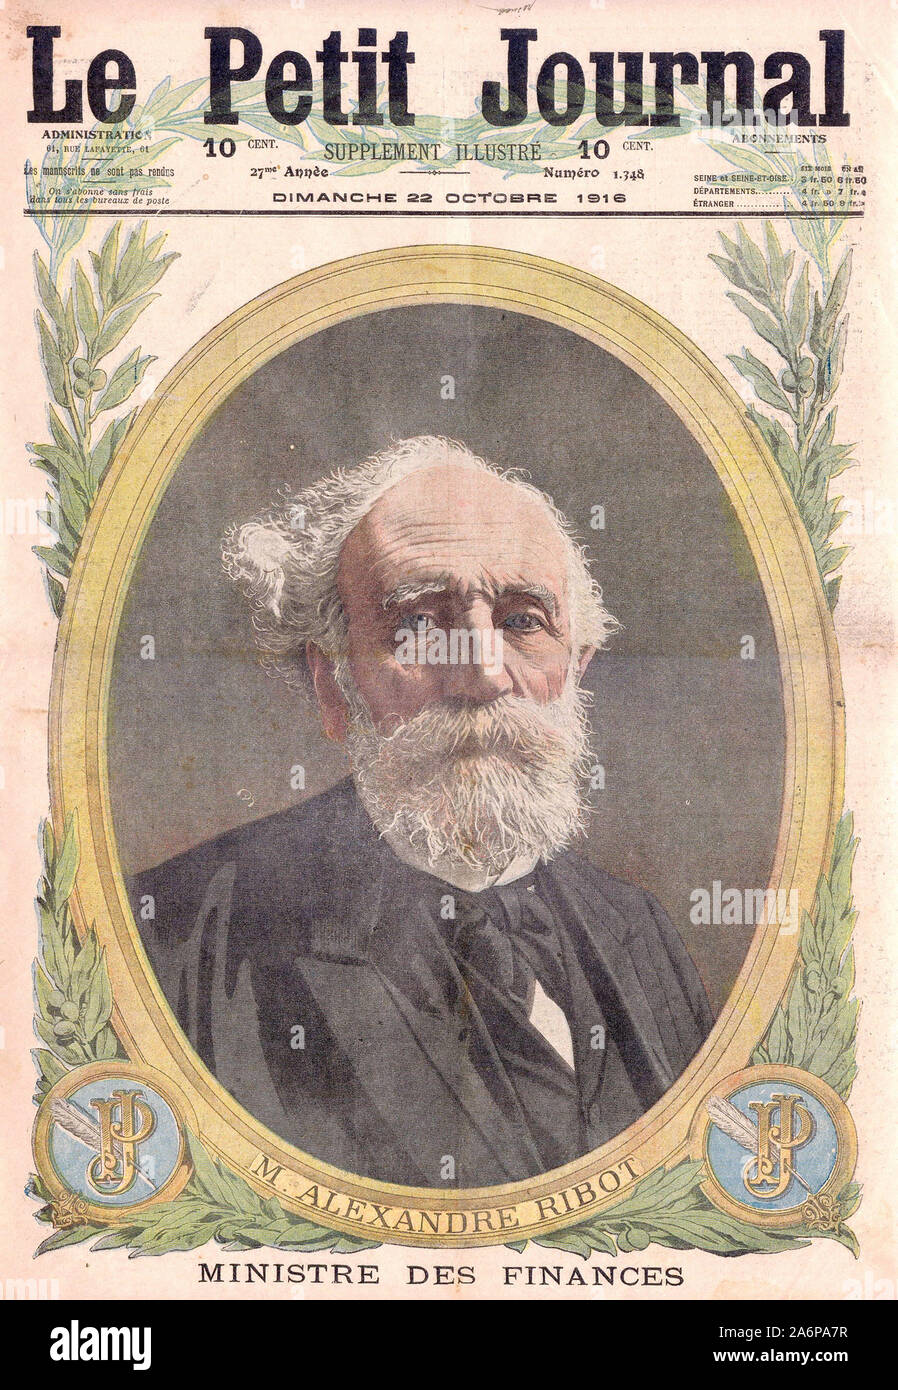 M. Alexandre Ribot, MINISTRE DES FINANCES - In 'Le Petit Journal' French illustrated newspaper -  1916 Stock Photo